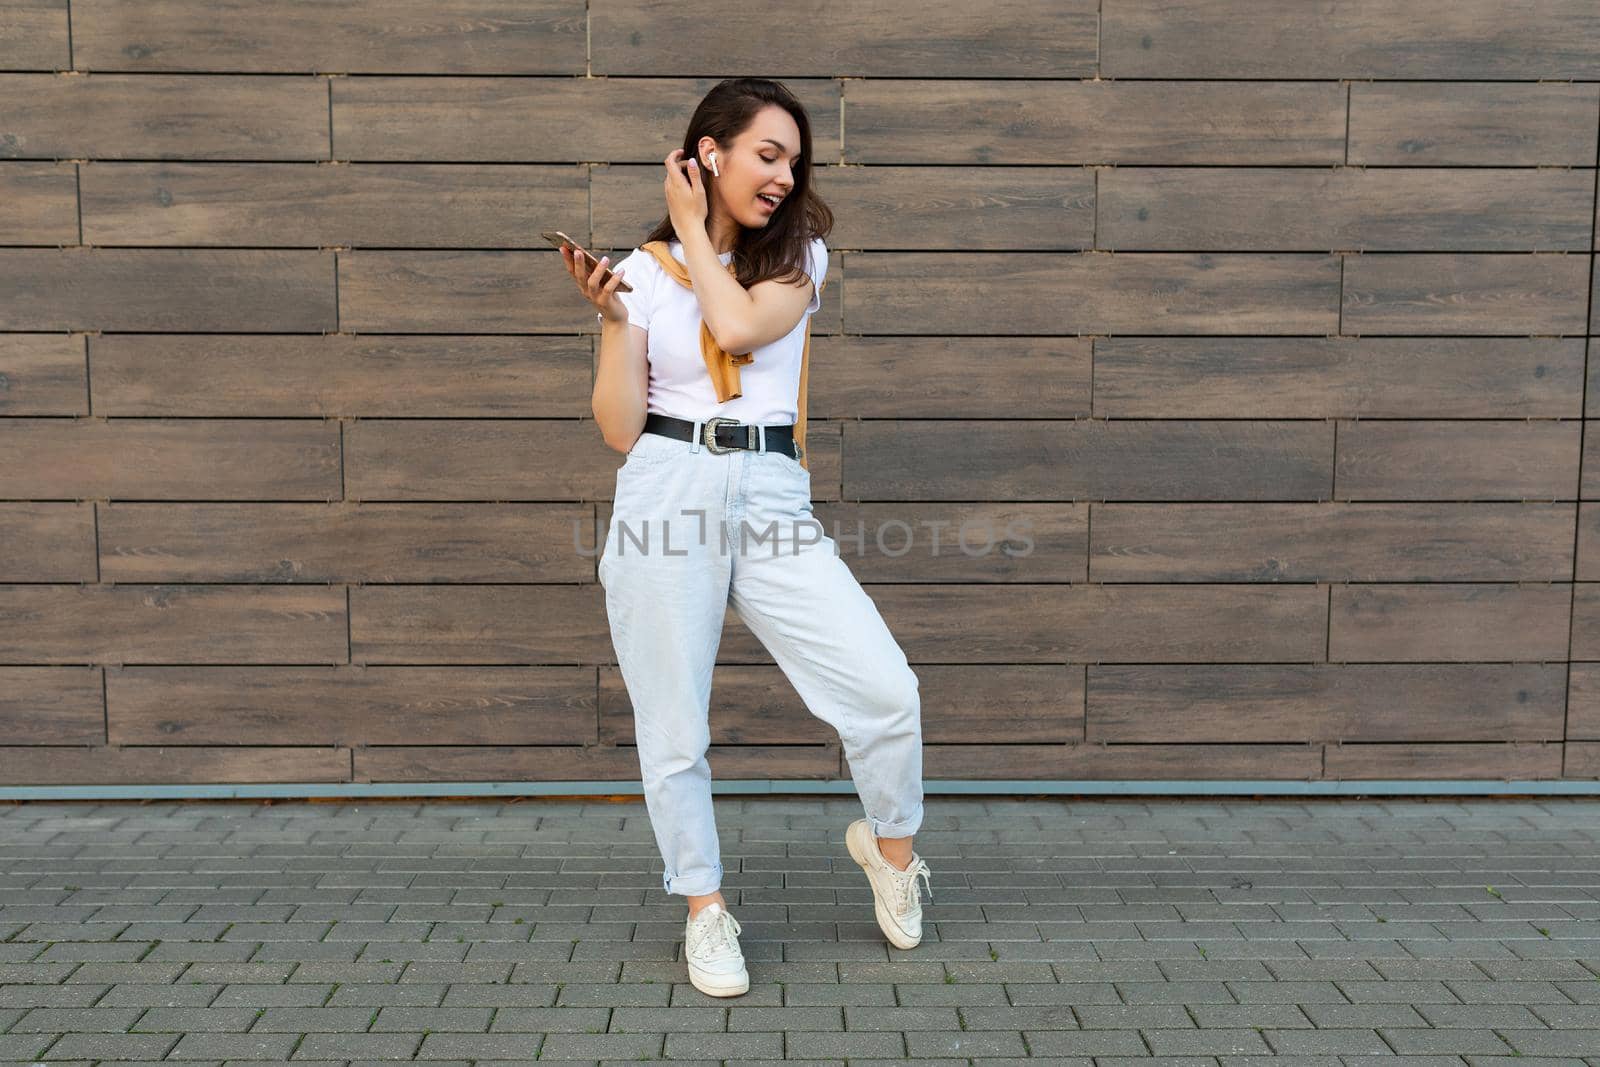 Full length body size photo of beautiful joyful smiling young woman wearing stylish casual clothes standing in the street holding and using mobile phone wearing white bluetooth headphones listening to music and having fun looking to the side by TRMK